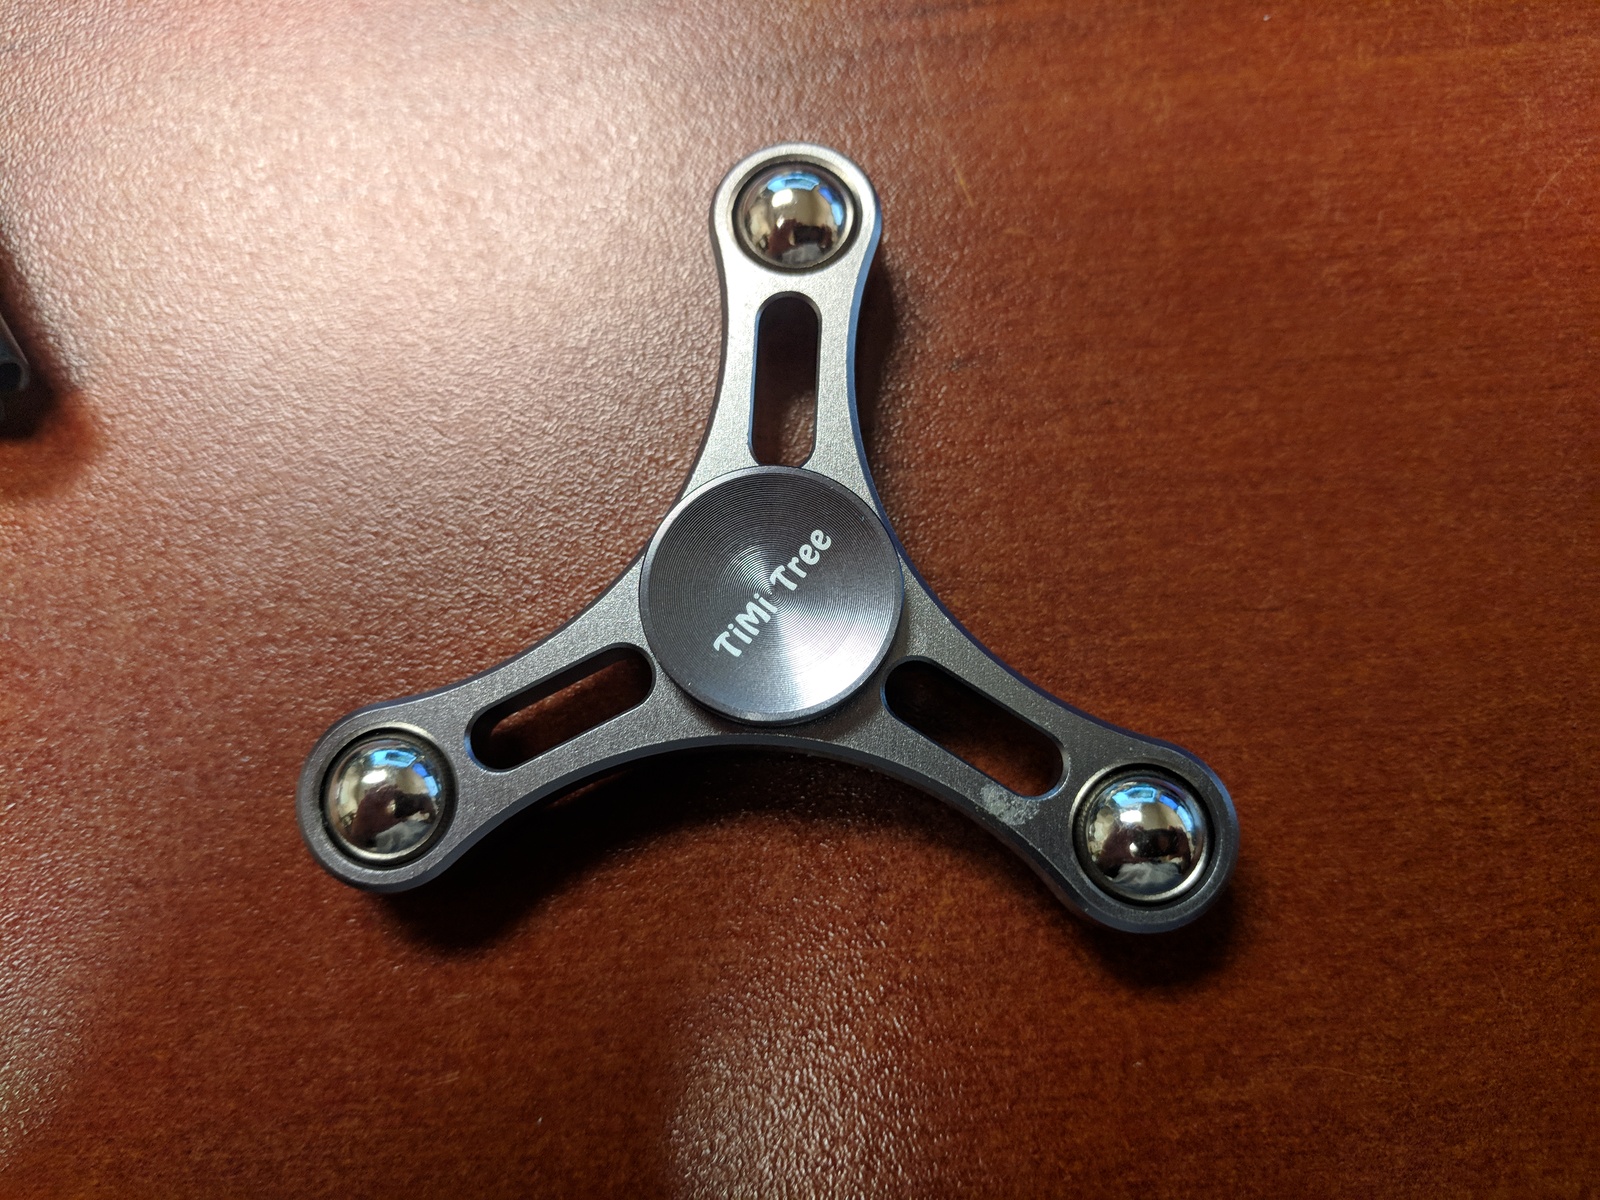 Awesome spinner